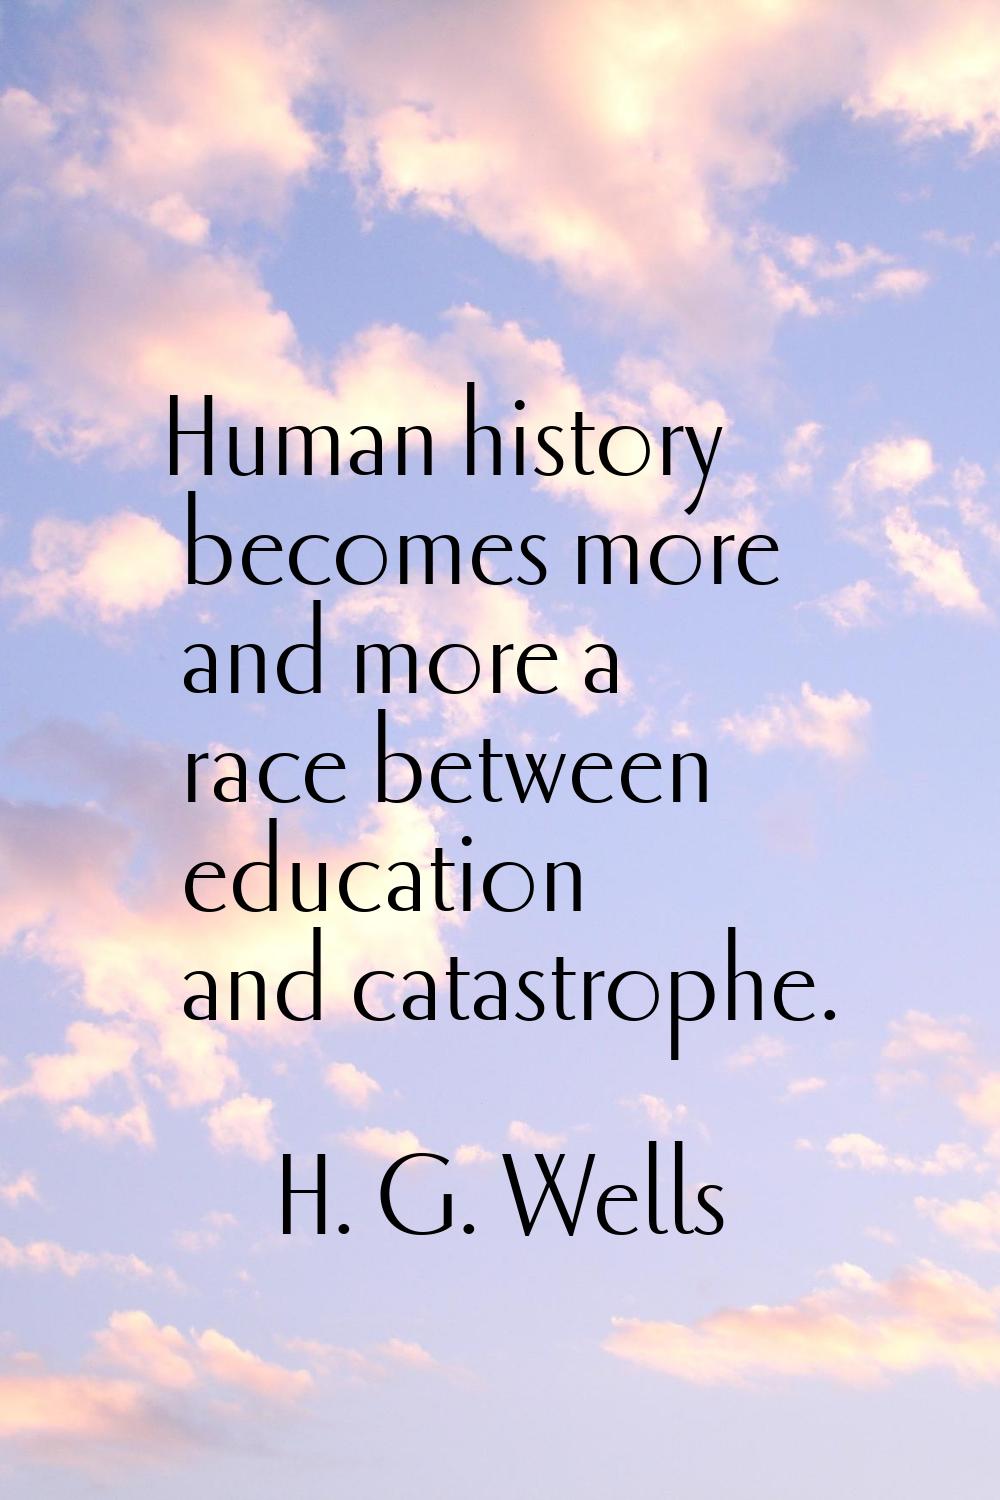 Human history becomes more and more a race between education and catastrophe.